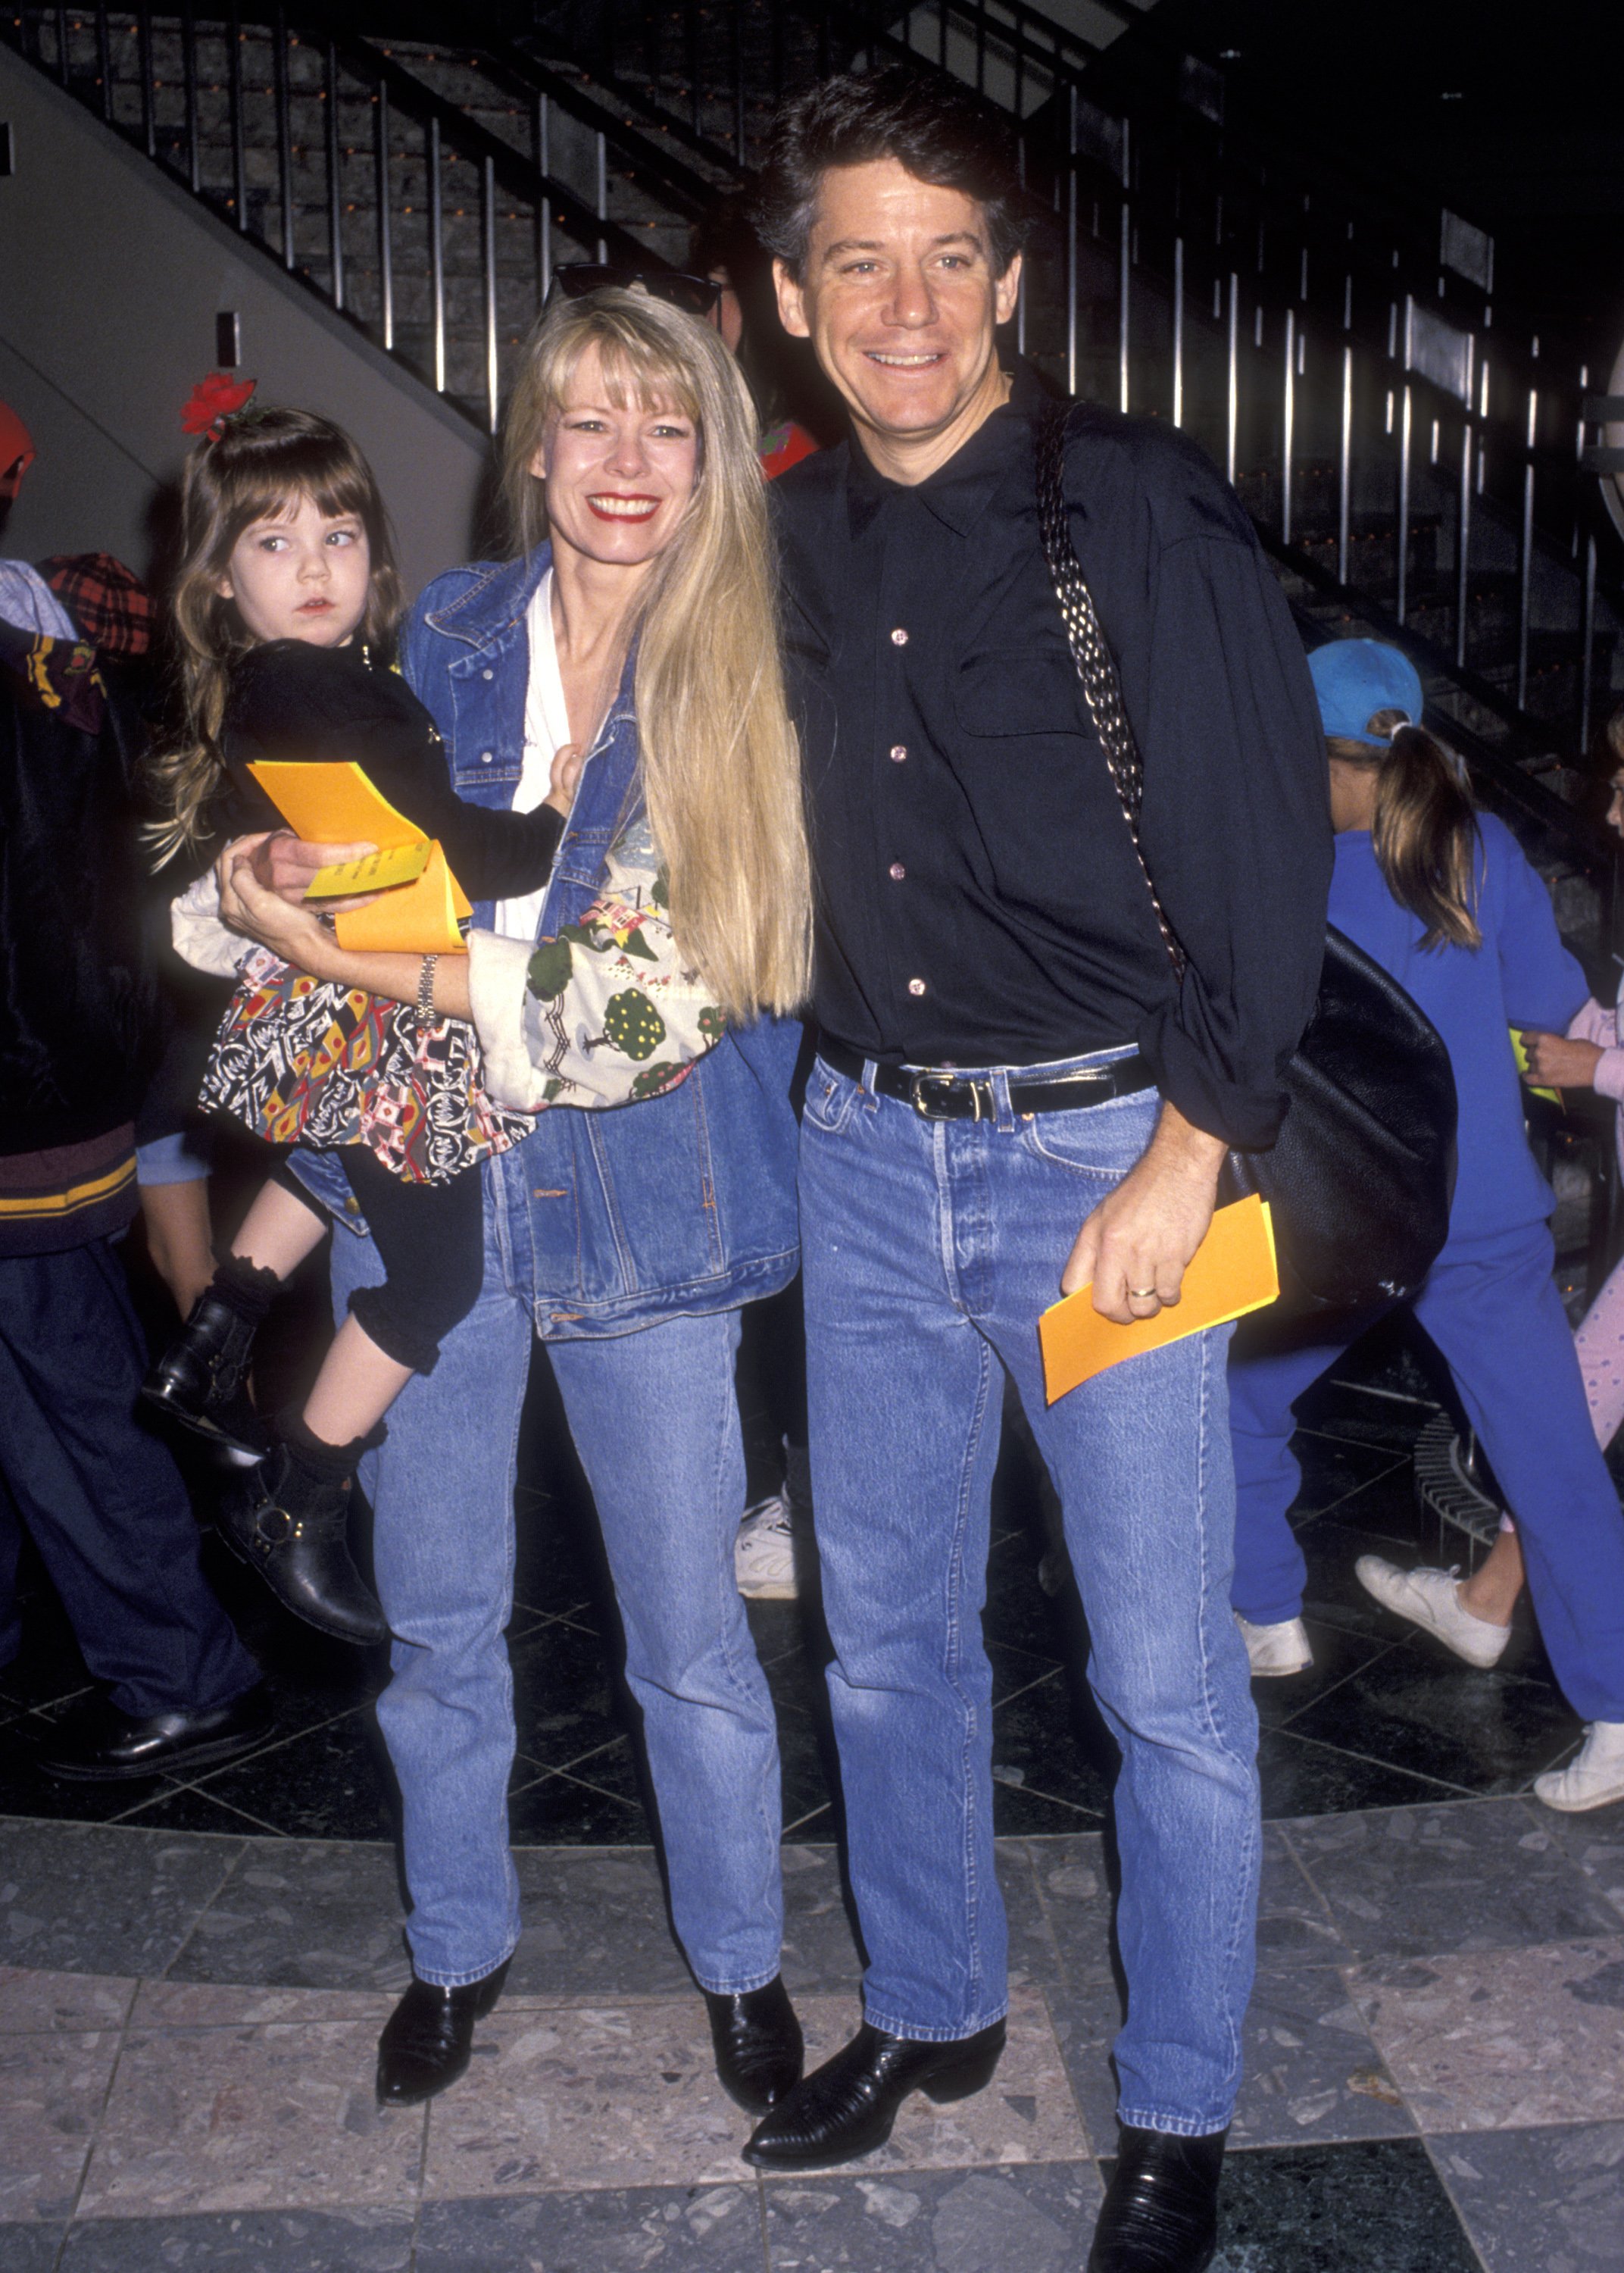 Anson Williams, wife Jackie Gerken, and daughter Hannah Williams attend the 'Cop and 1/2 ' Universal City Premiere on March 28, 1993 at Cineplex Odeon Universal City 18 Theatres in Universal City, California | Source: Getty Images